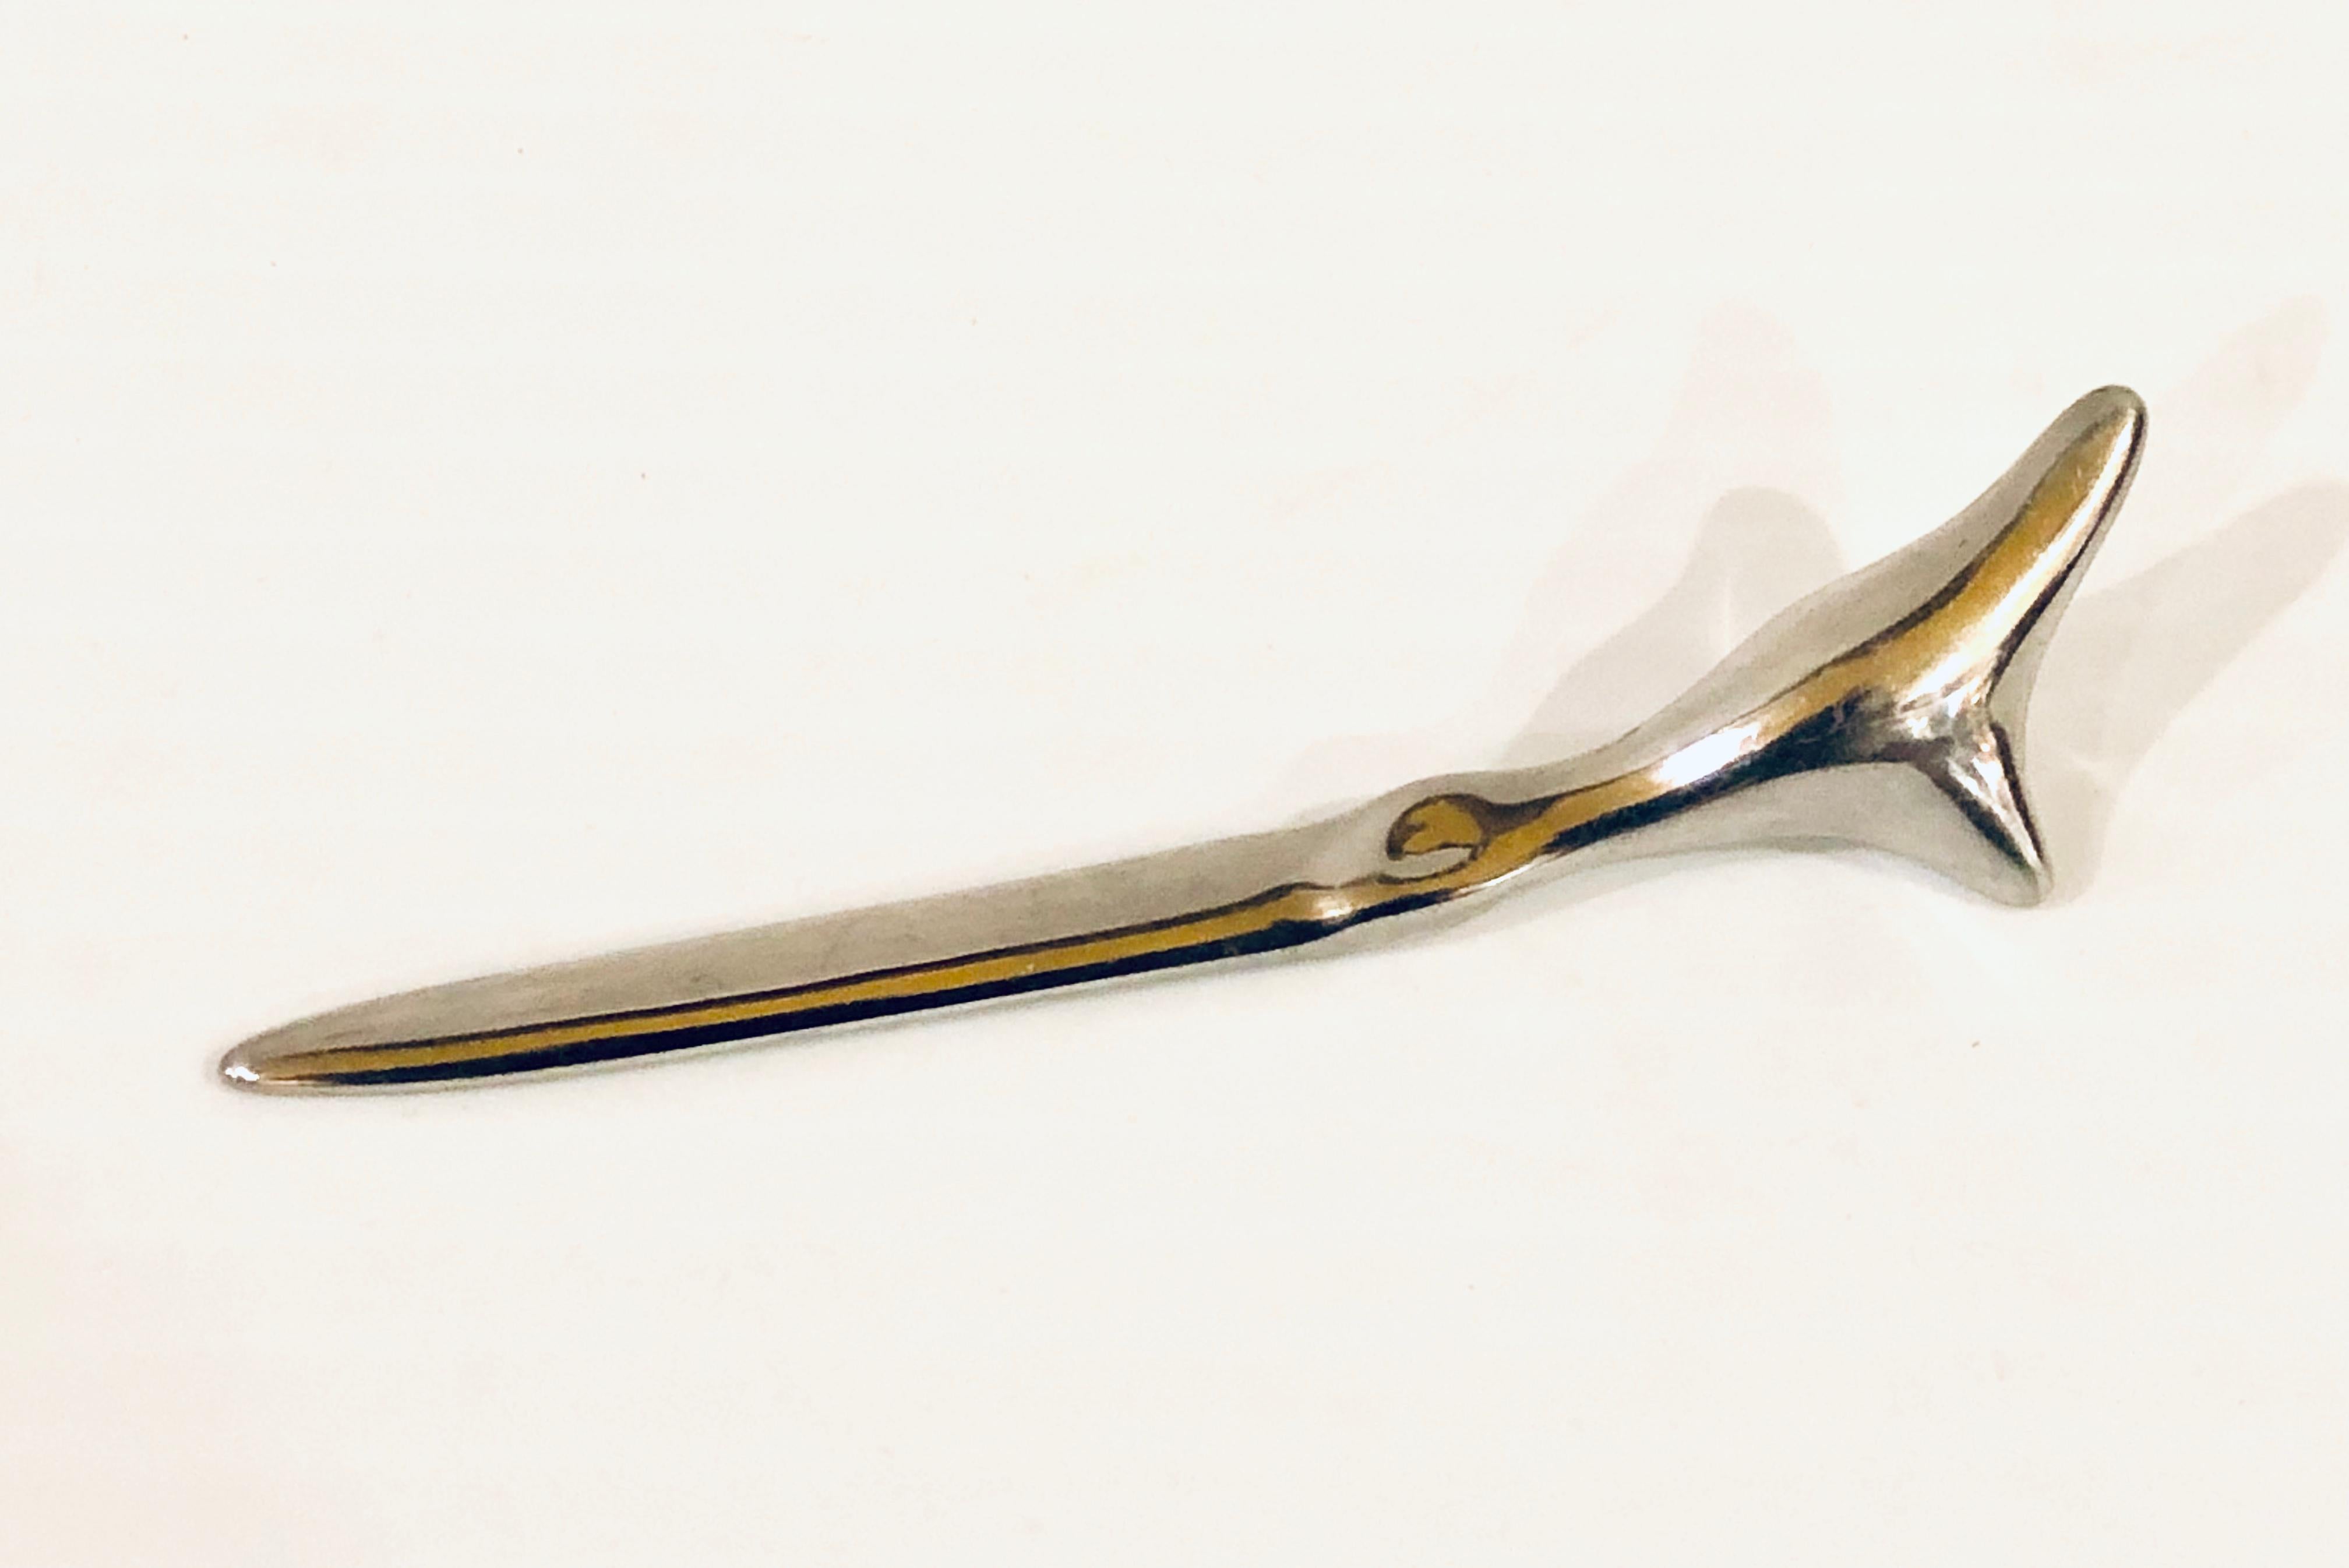 Polished aluminum letter opener seal sculpture by Hosleton signed, and numbered made in Canada circa 1970s.